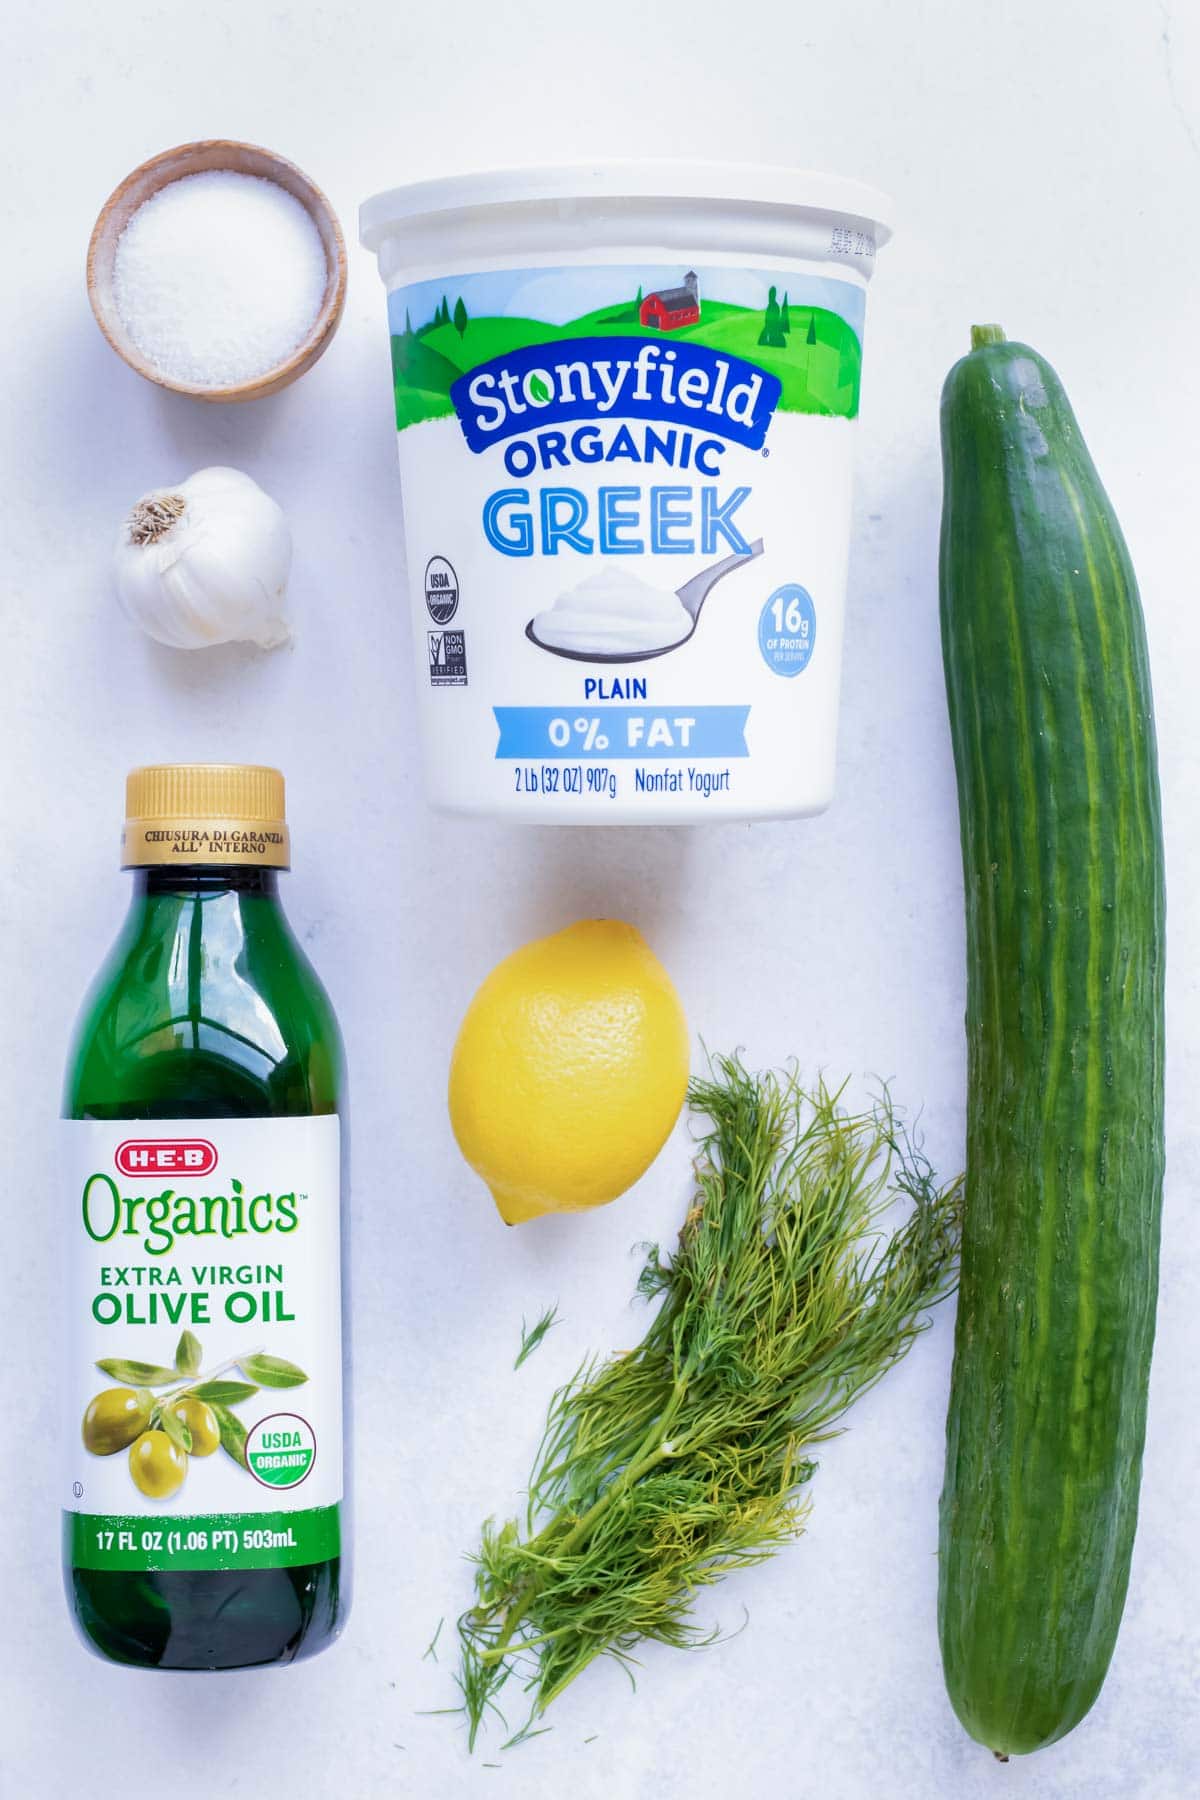 Cucumber, fresh dill, lemon, Greek yogurt, and other ingredients are combined in this tzatziki sauce (recipe).